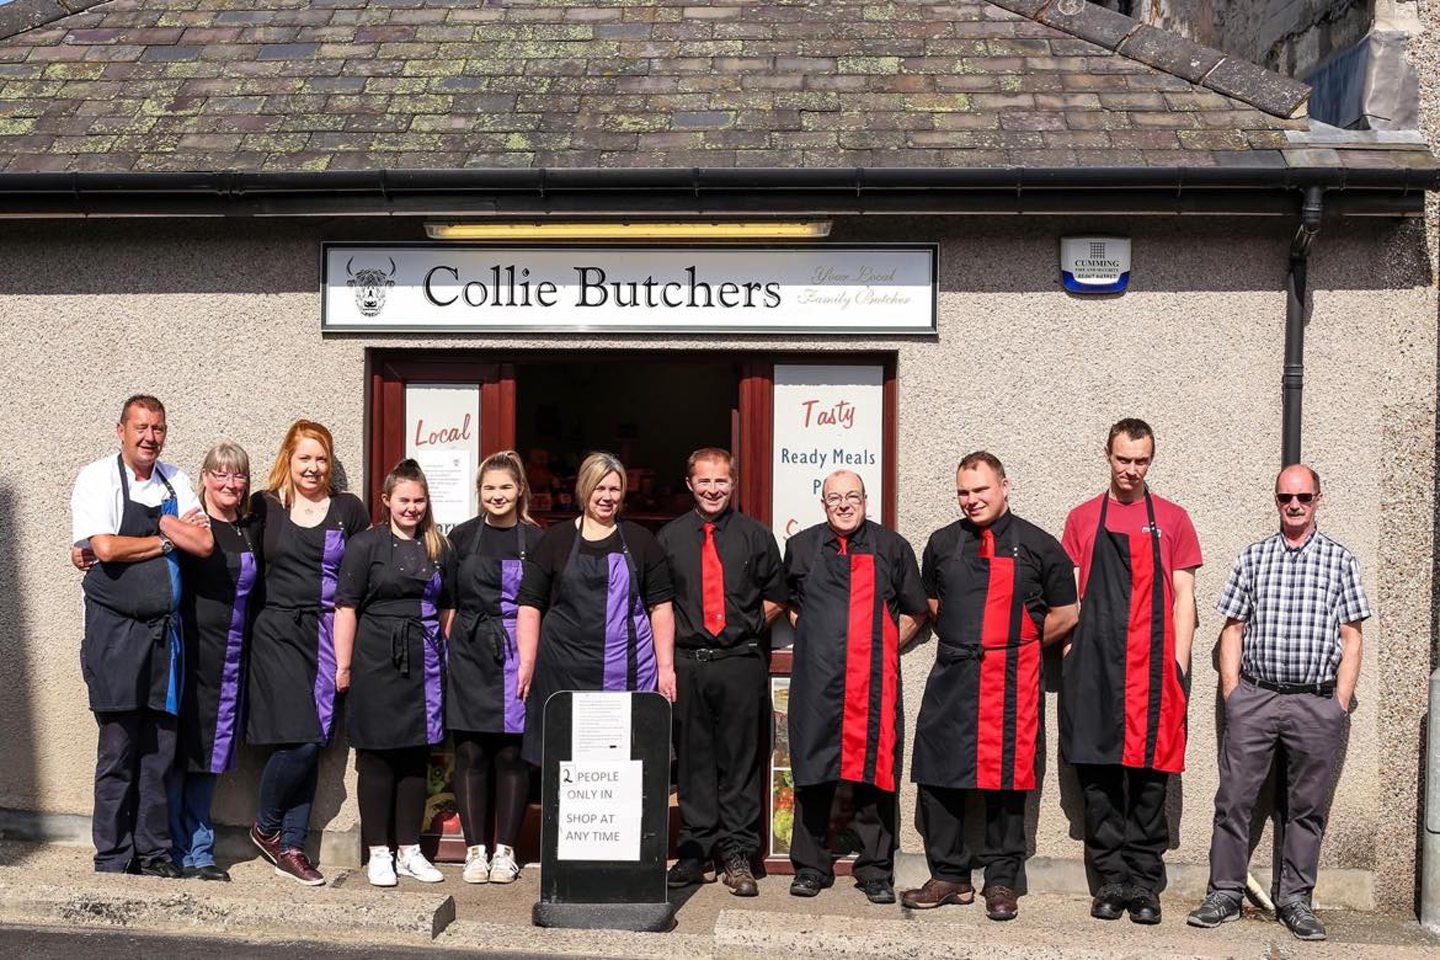 Ian Forbes alongside a line up of staff from Collie Butchers near Inverurie.